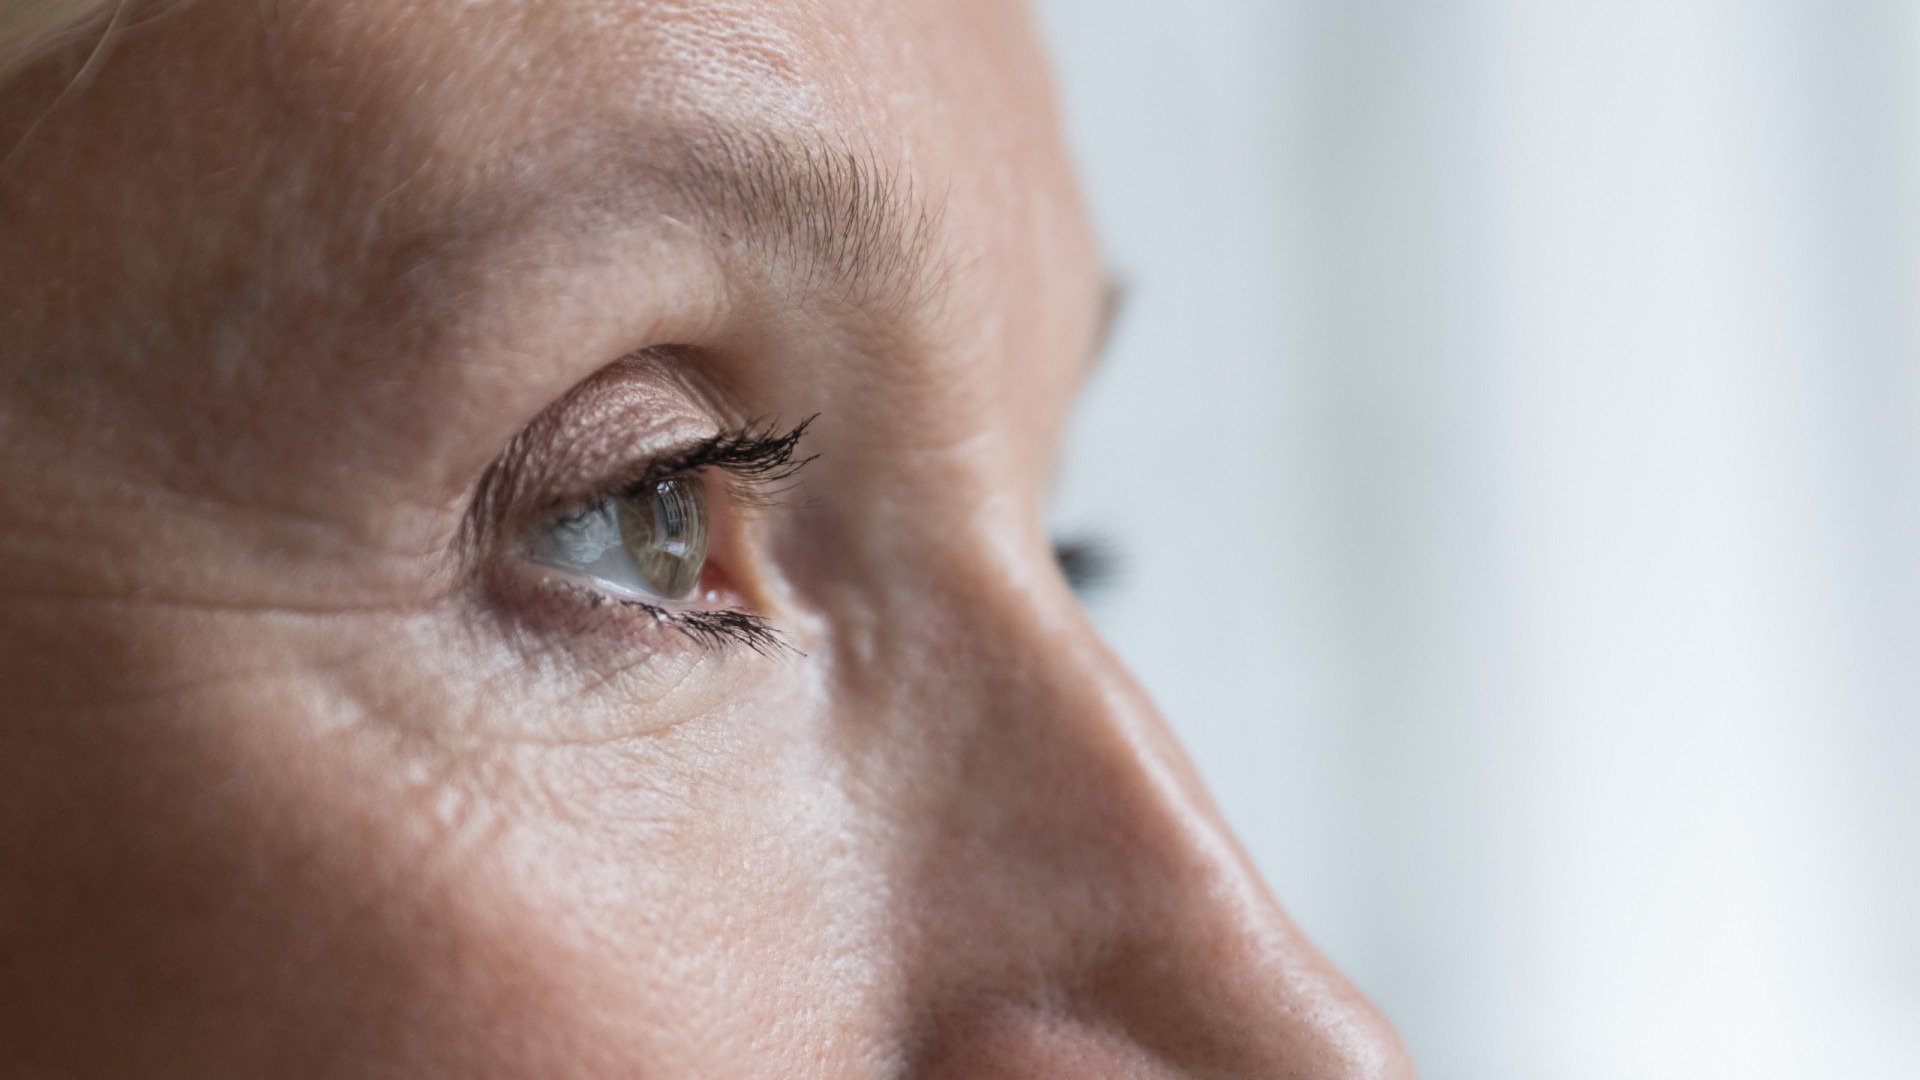 A study finds that eye changes may be early signs of Alzheimer’s disease